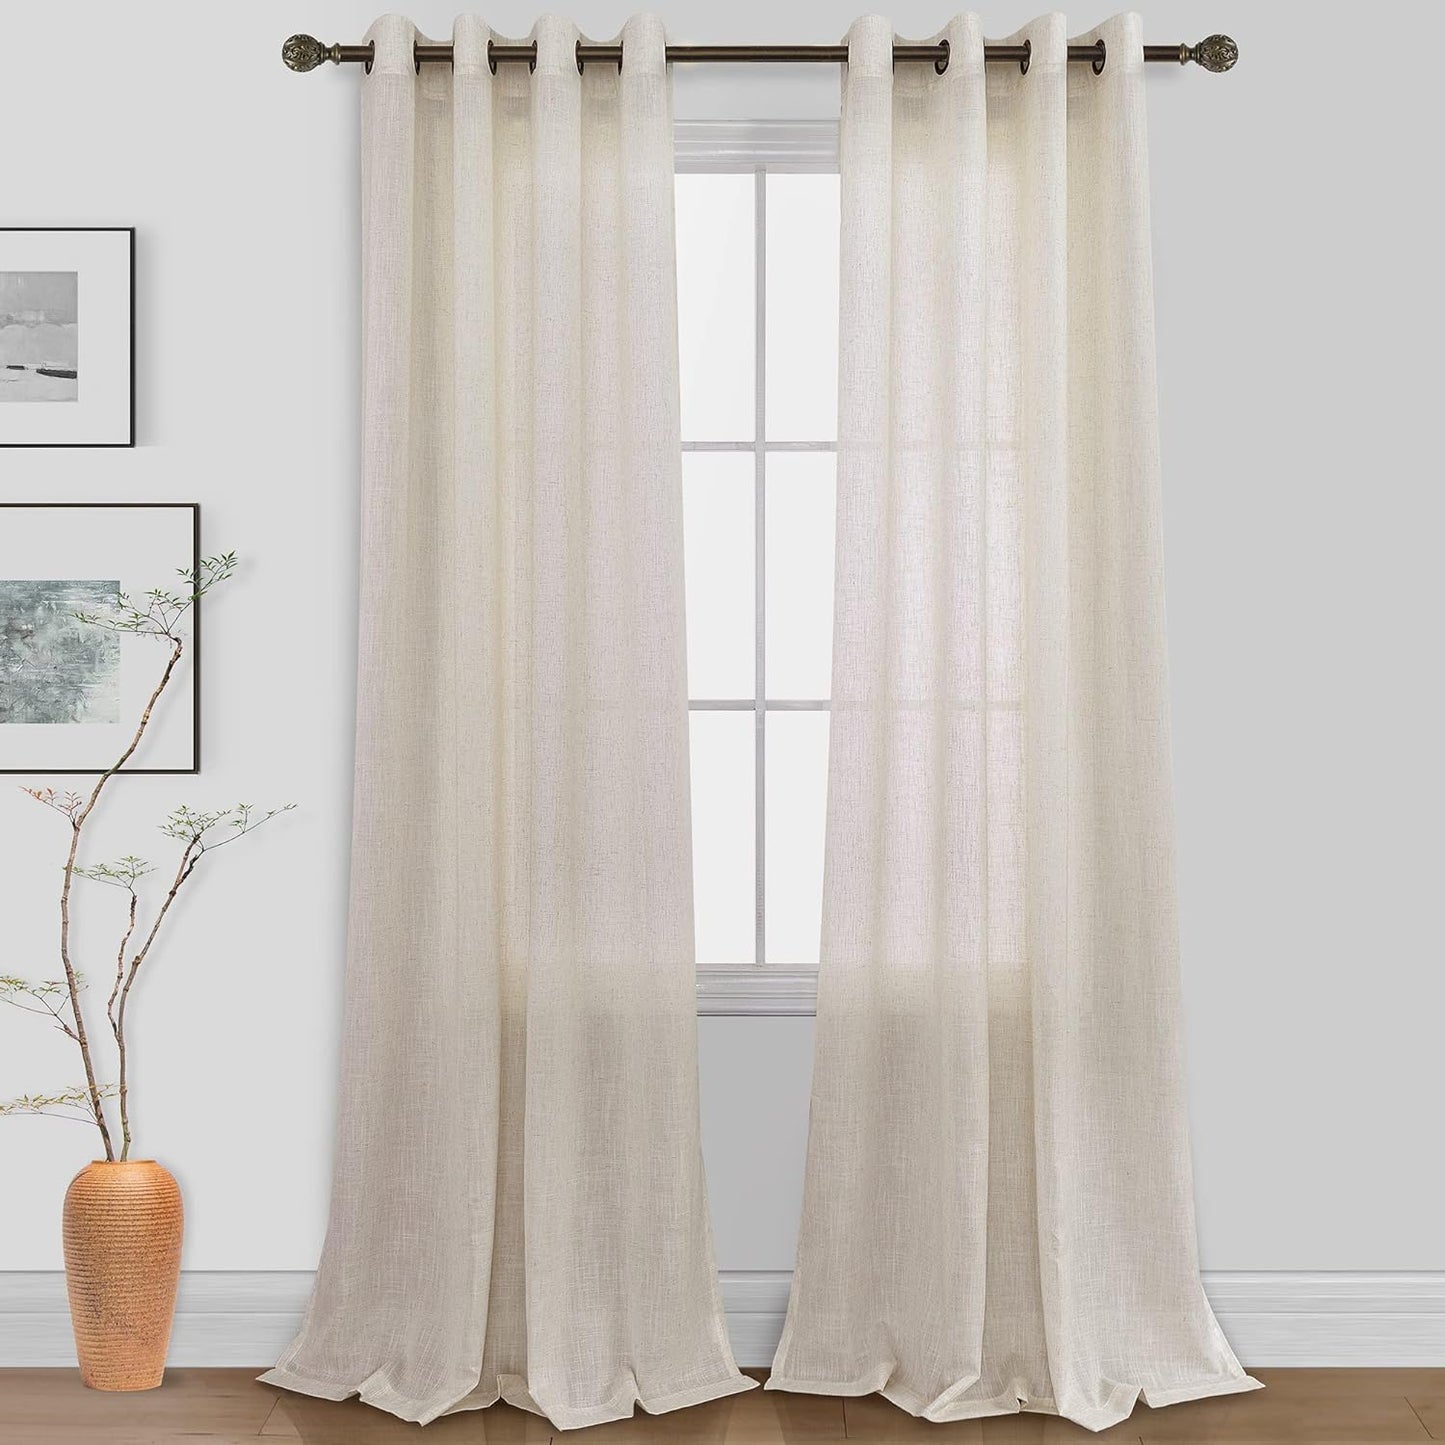 KOUFALL Beige Rustic Country Curtains for Living Room 84 Inches Long Flax Linen Bronze Grommet Tan Sand Color Solid Faux Linen Curtains for Bedroom Sliding Glass Patio Door 2 Panels  KOUFALL TEXTILE Linen 52X120 